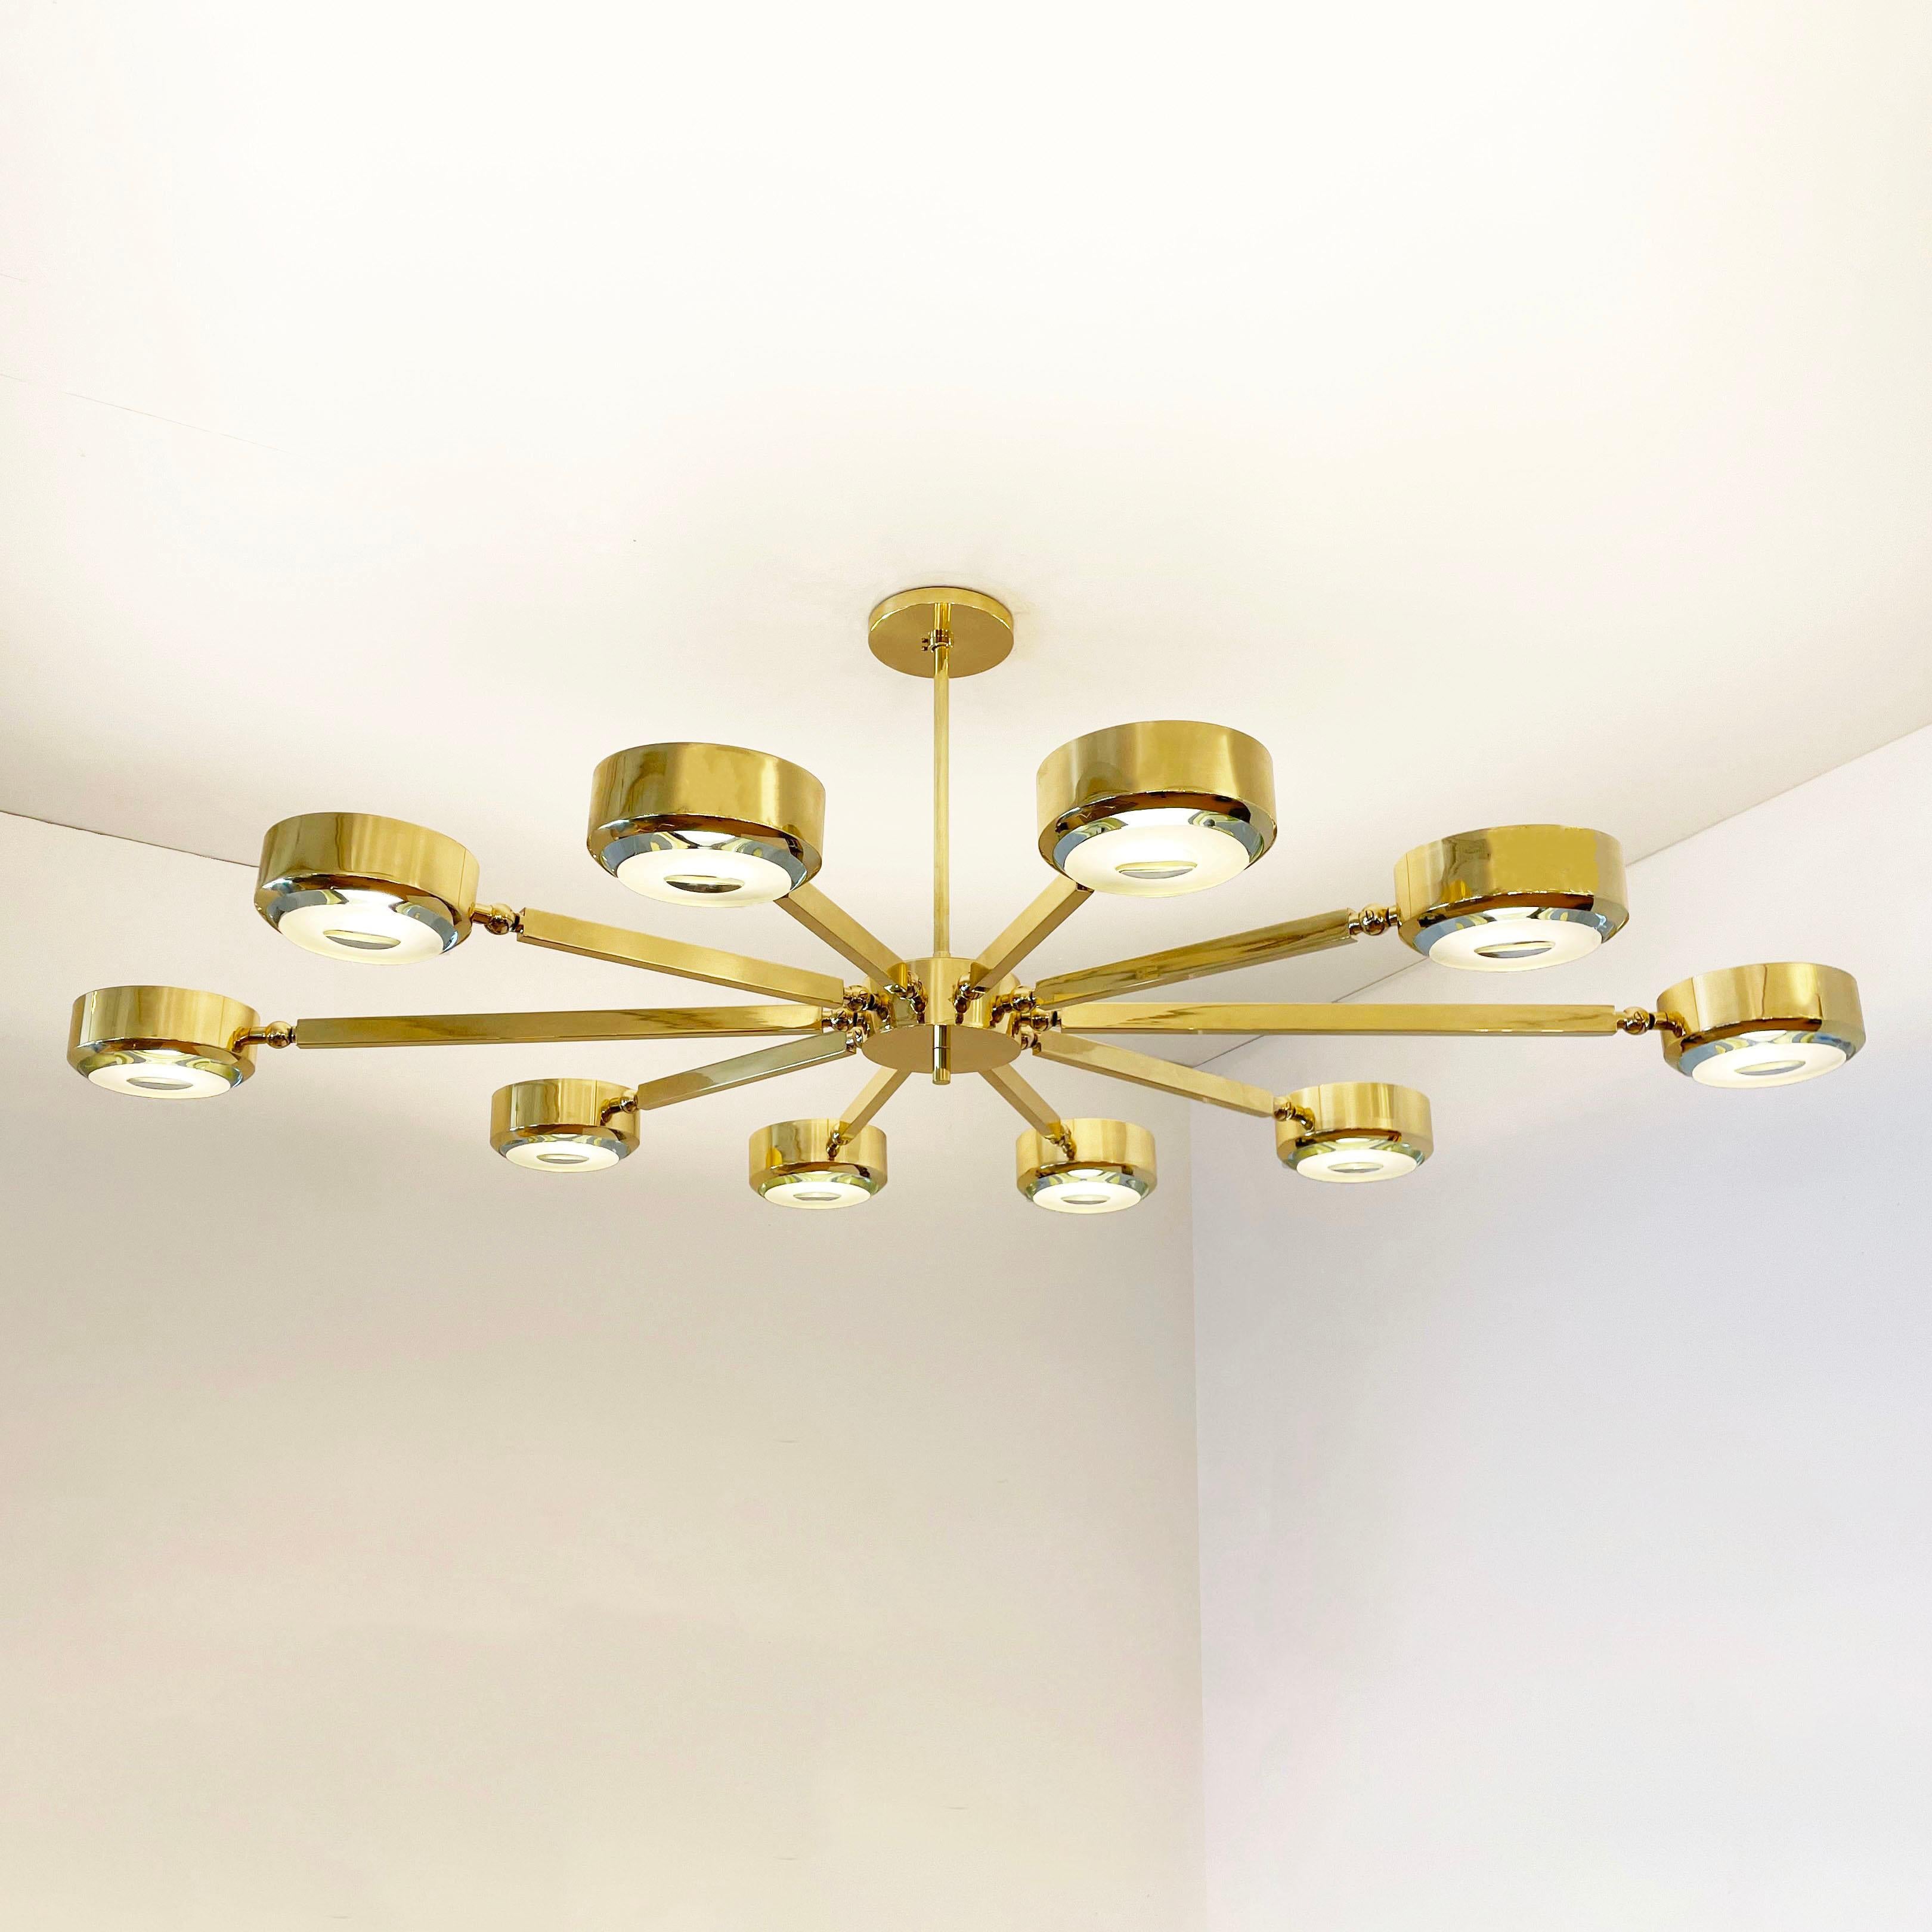 Modern Oculus Oval Ceiling Light by Gaspare Asaro- Polished Brass with Carved Glass For Sale